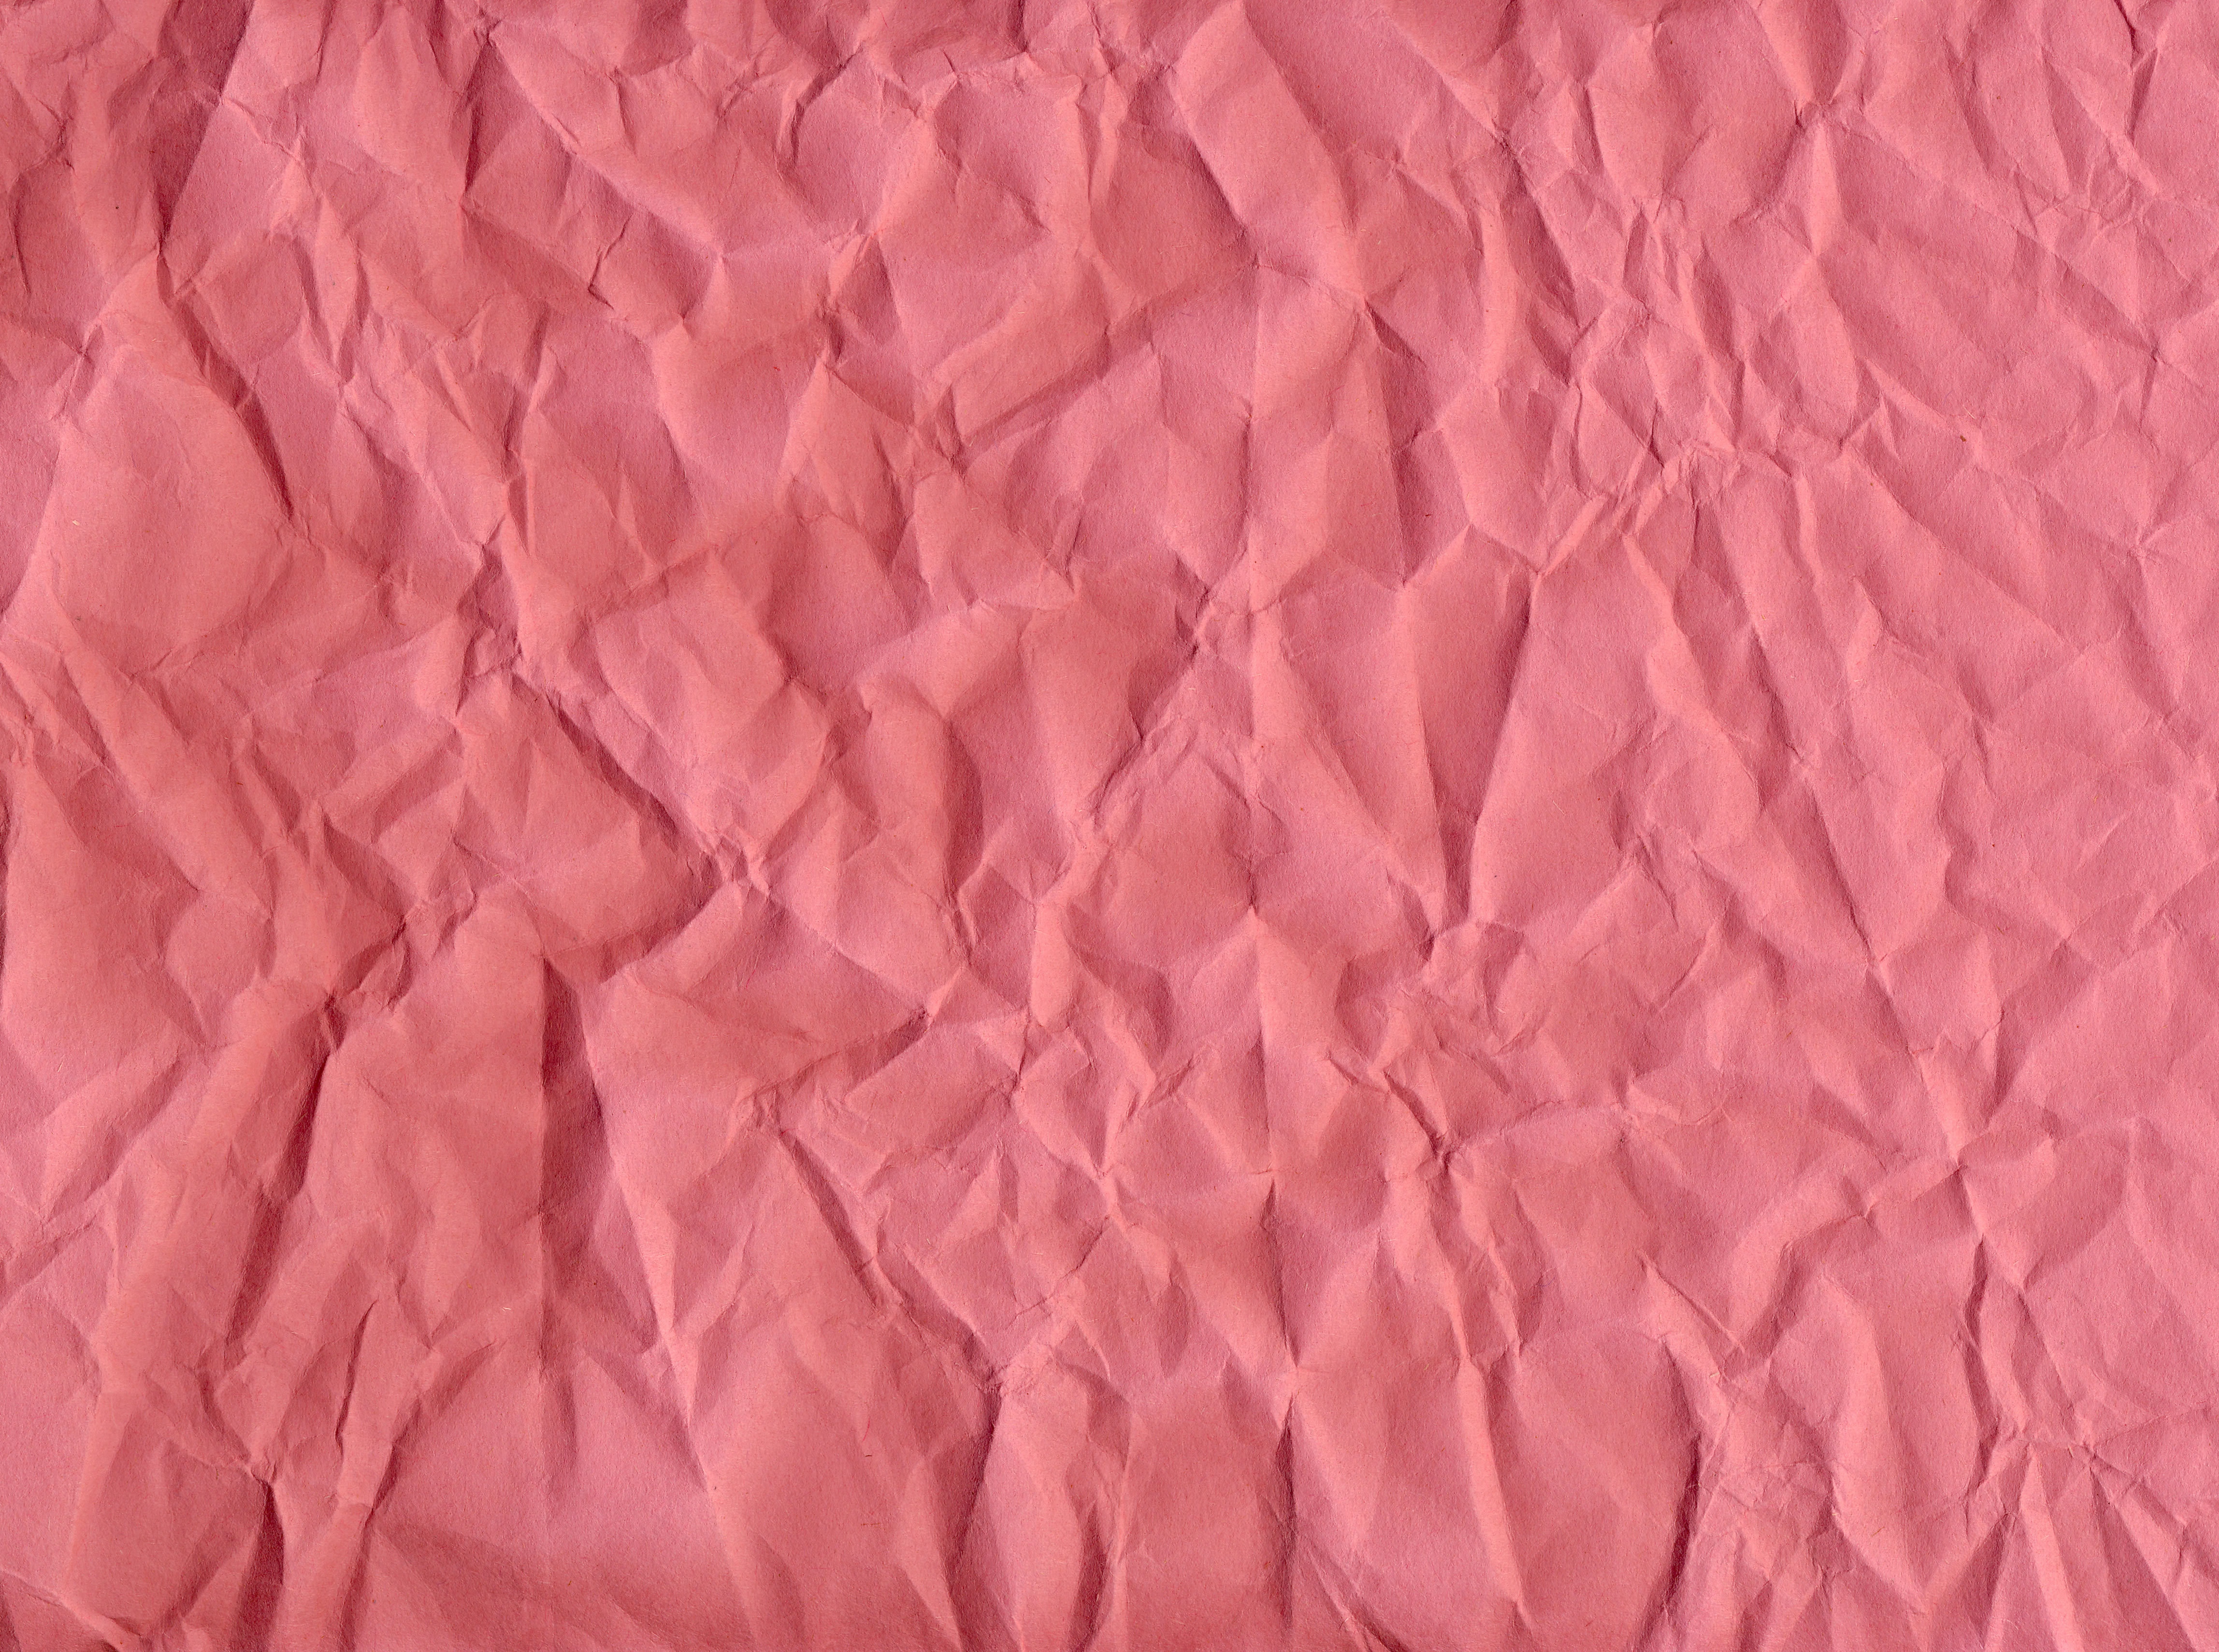 pink creased paper texture background